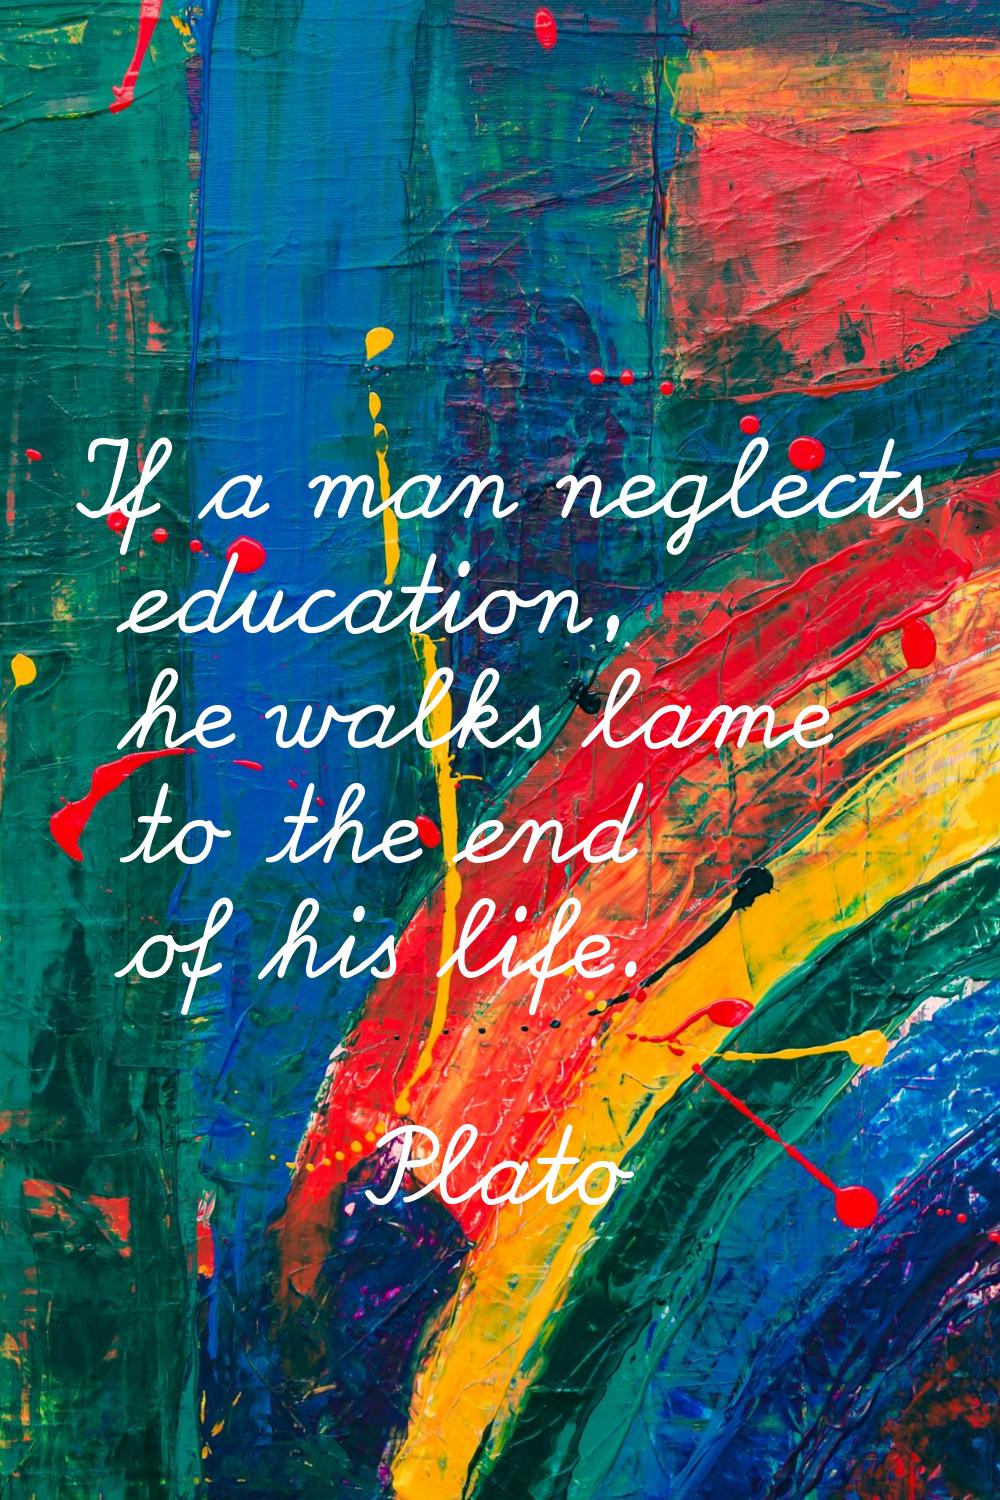 If a man neglects education, he walks lame to the end of his life.